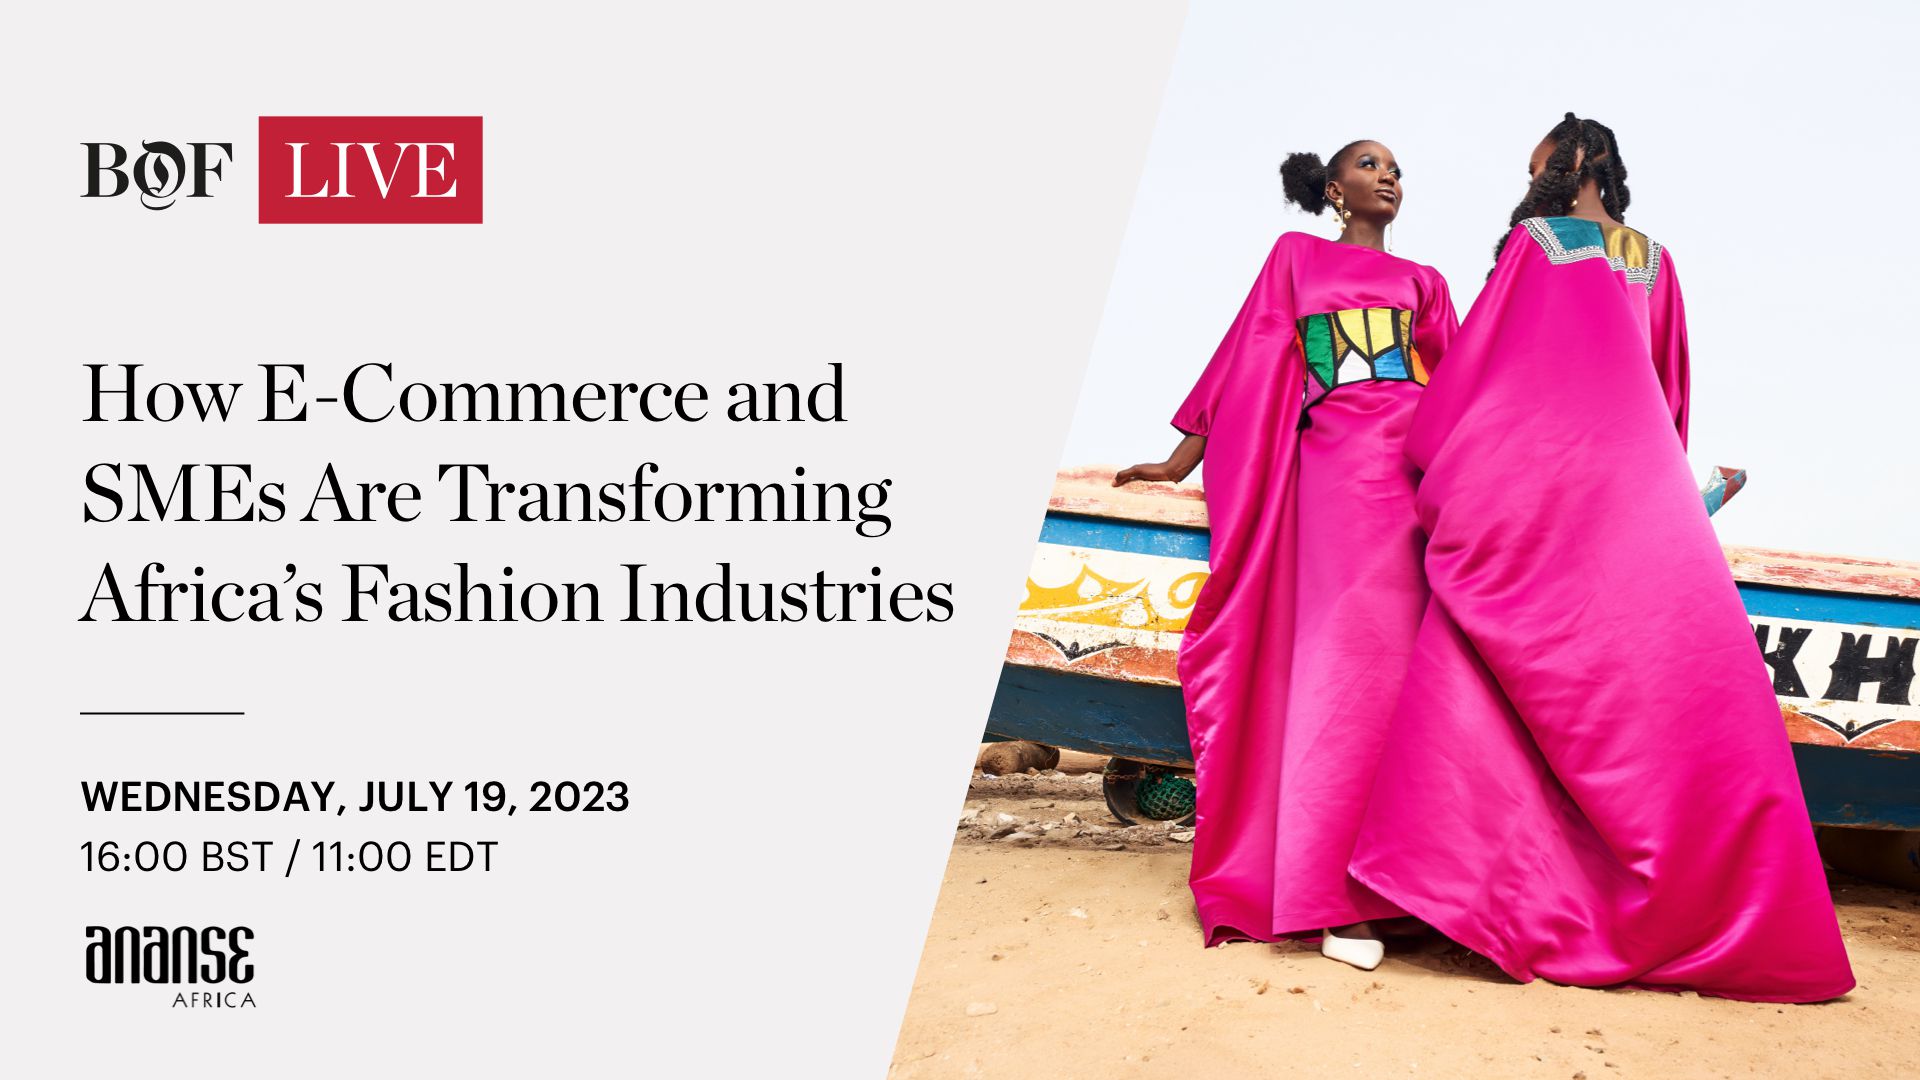 BoF LIVE | How E-Commerce and SMEs Are Transforming Africa’s Fashion Industries